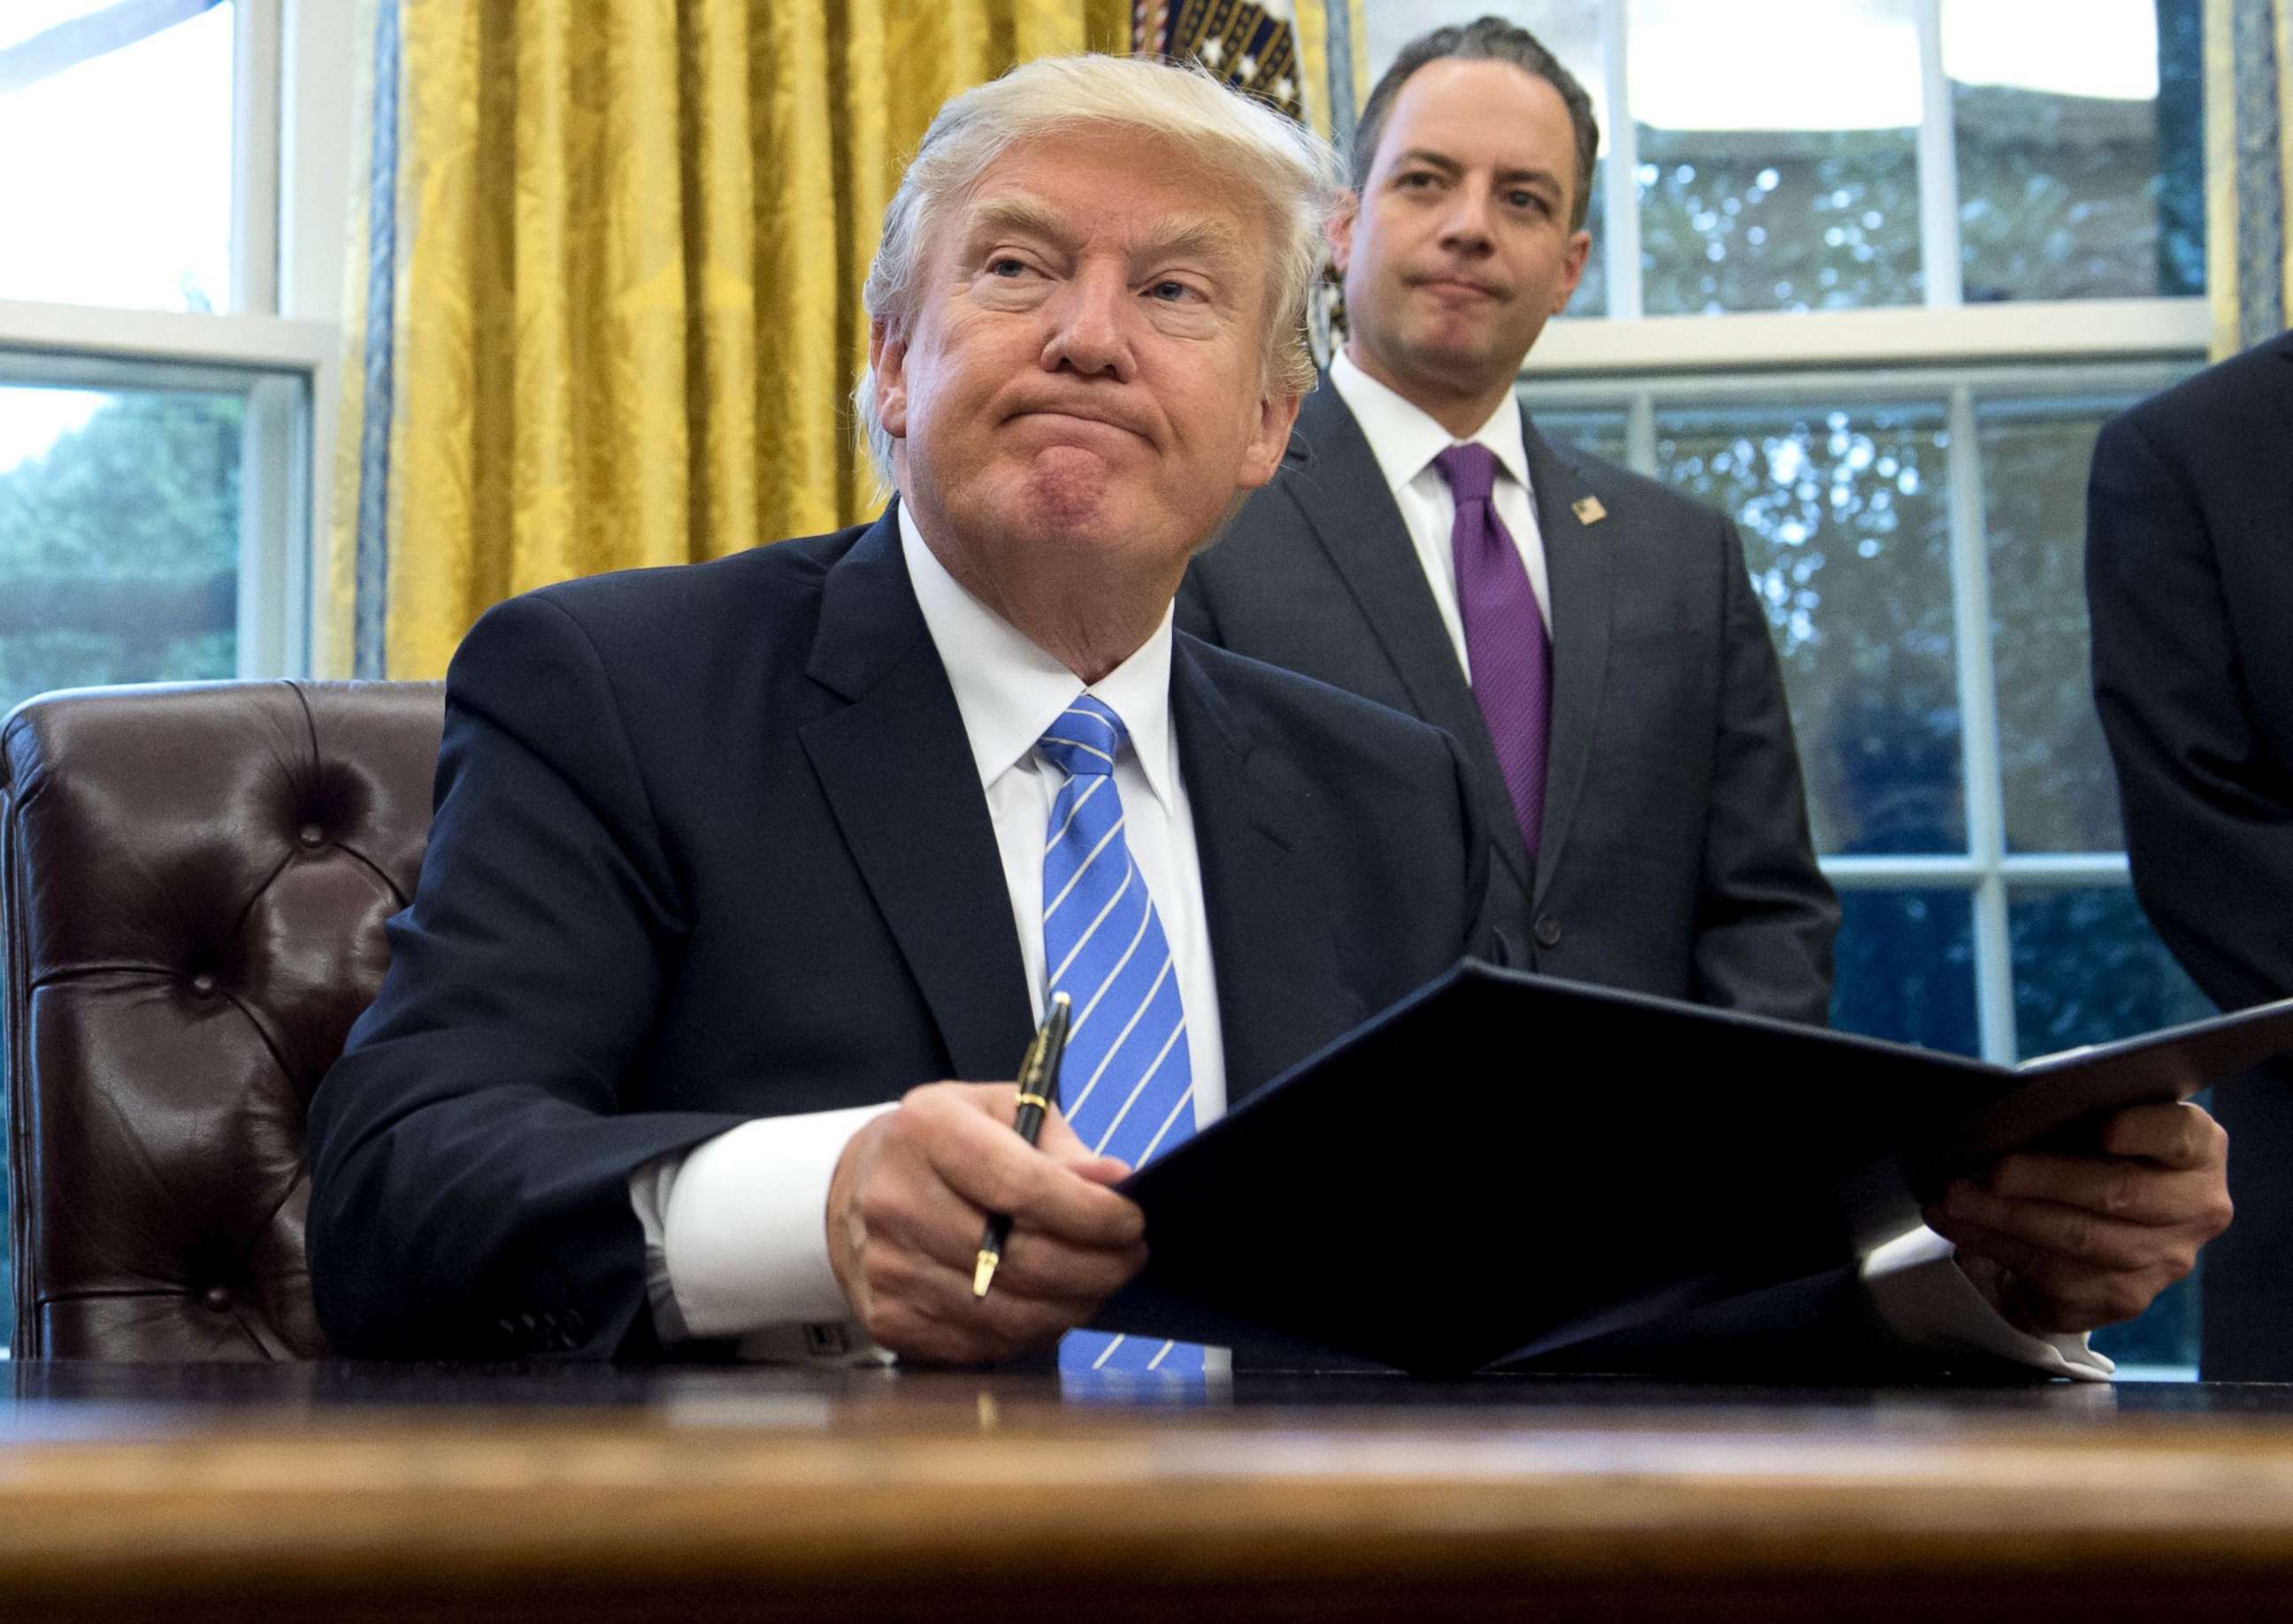 PHOTO: President Donald Trump signs an executive order as Chief of Staff Reince Priebus looks on in the Oval Office of the White House in Washington, D.C., Jan. 23, 2017.